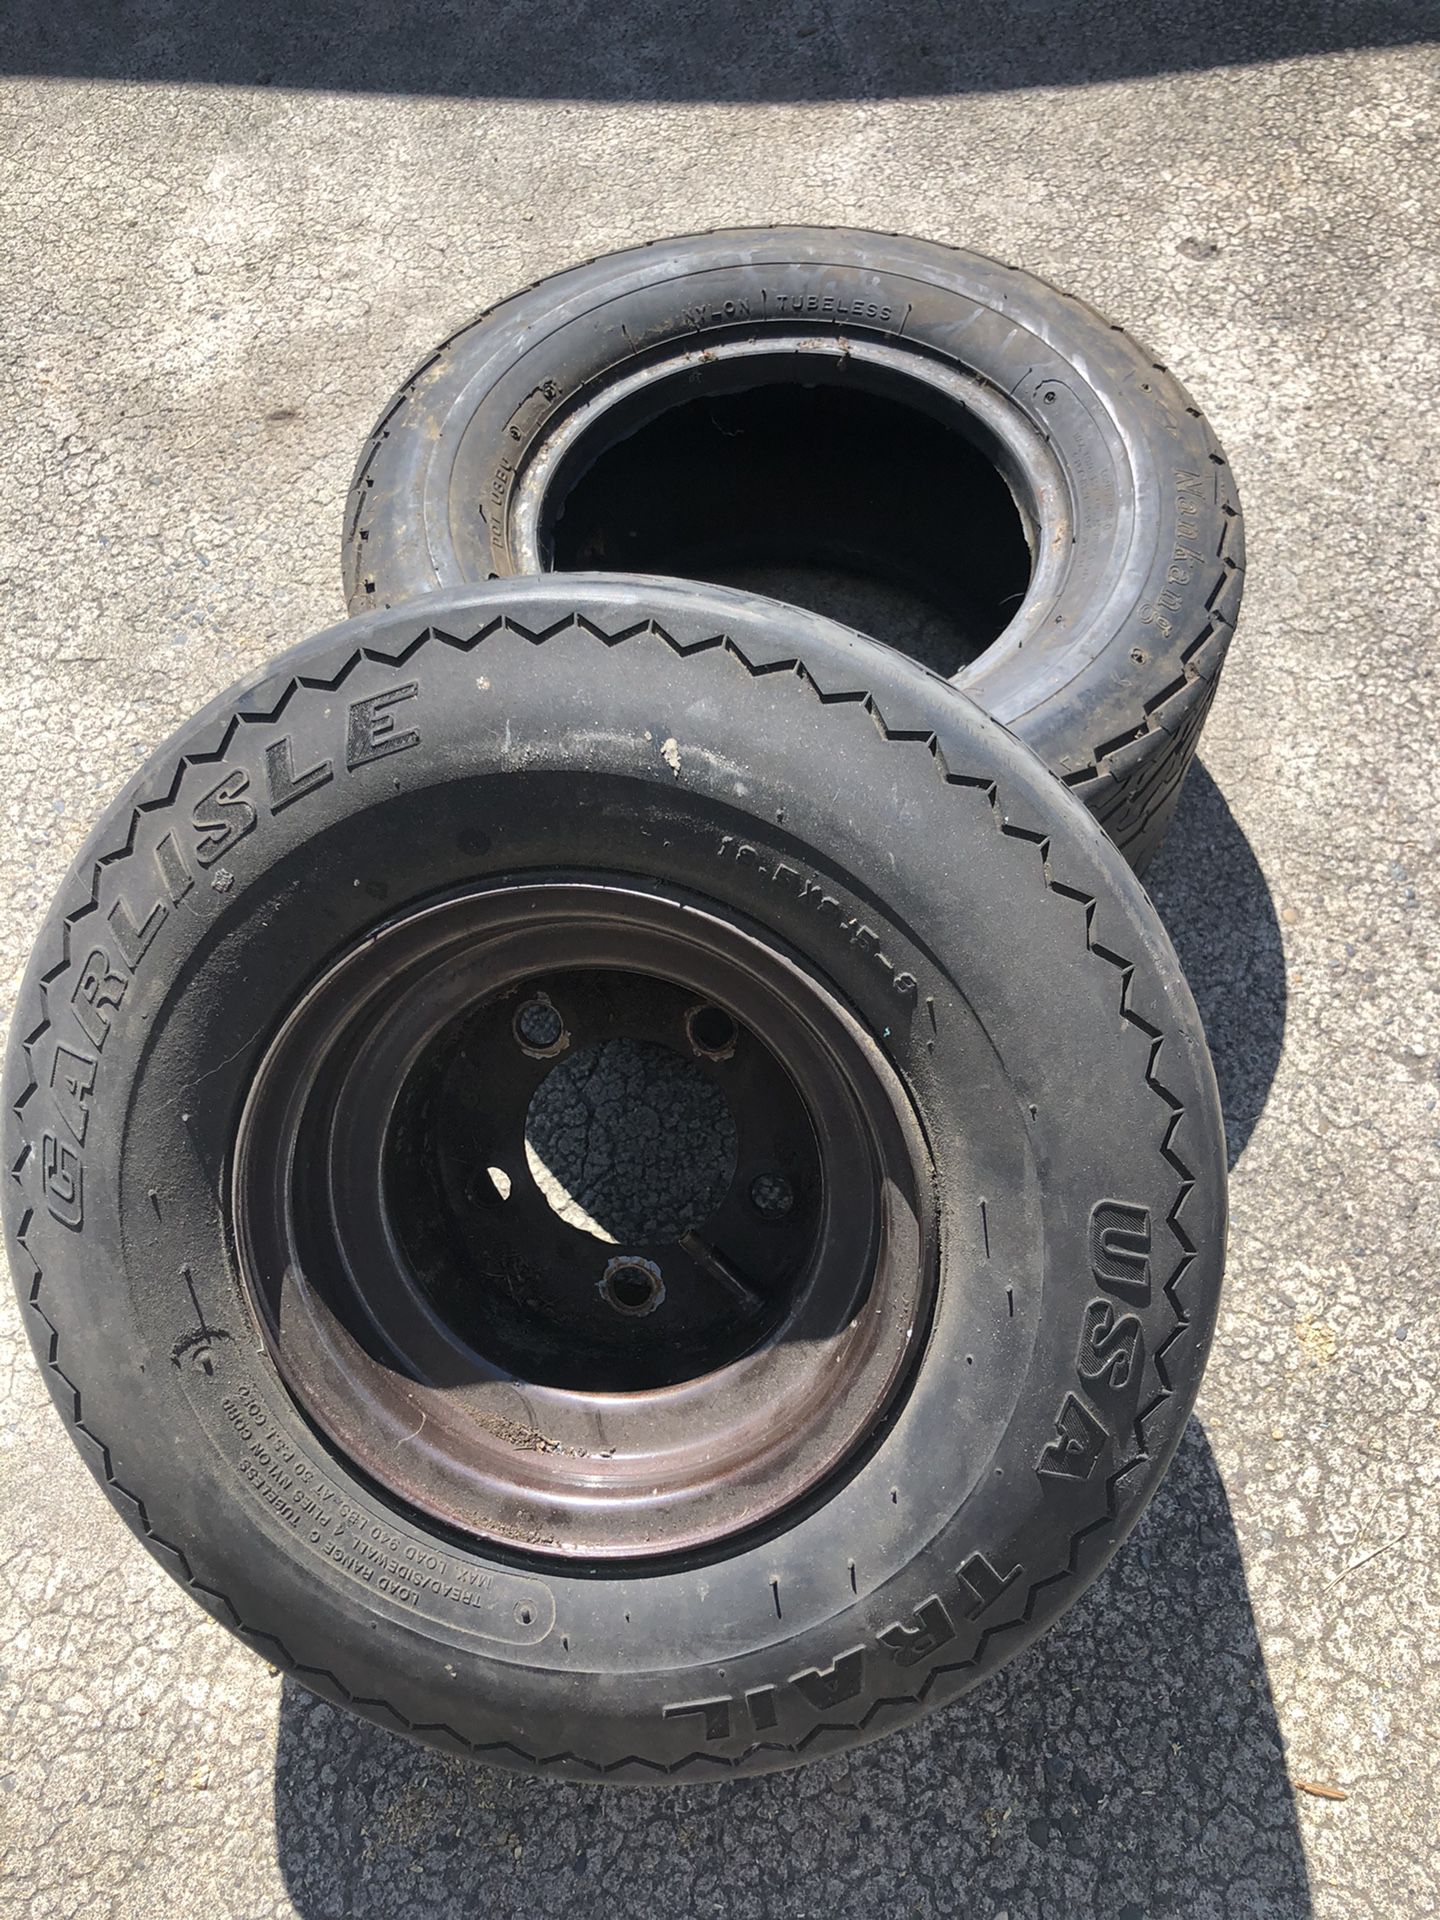 Trailer tires and one wheel